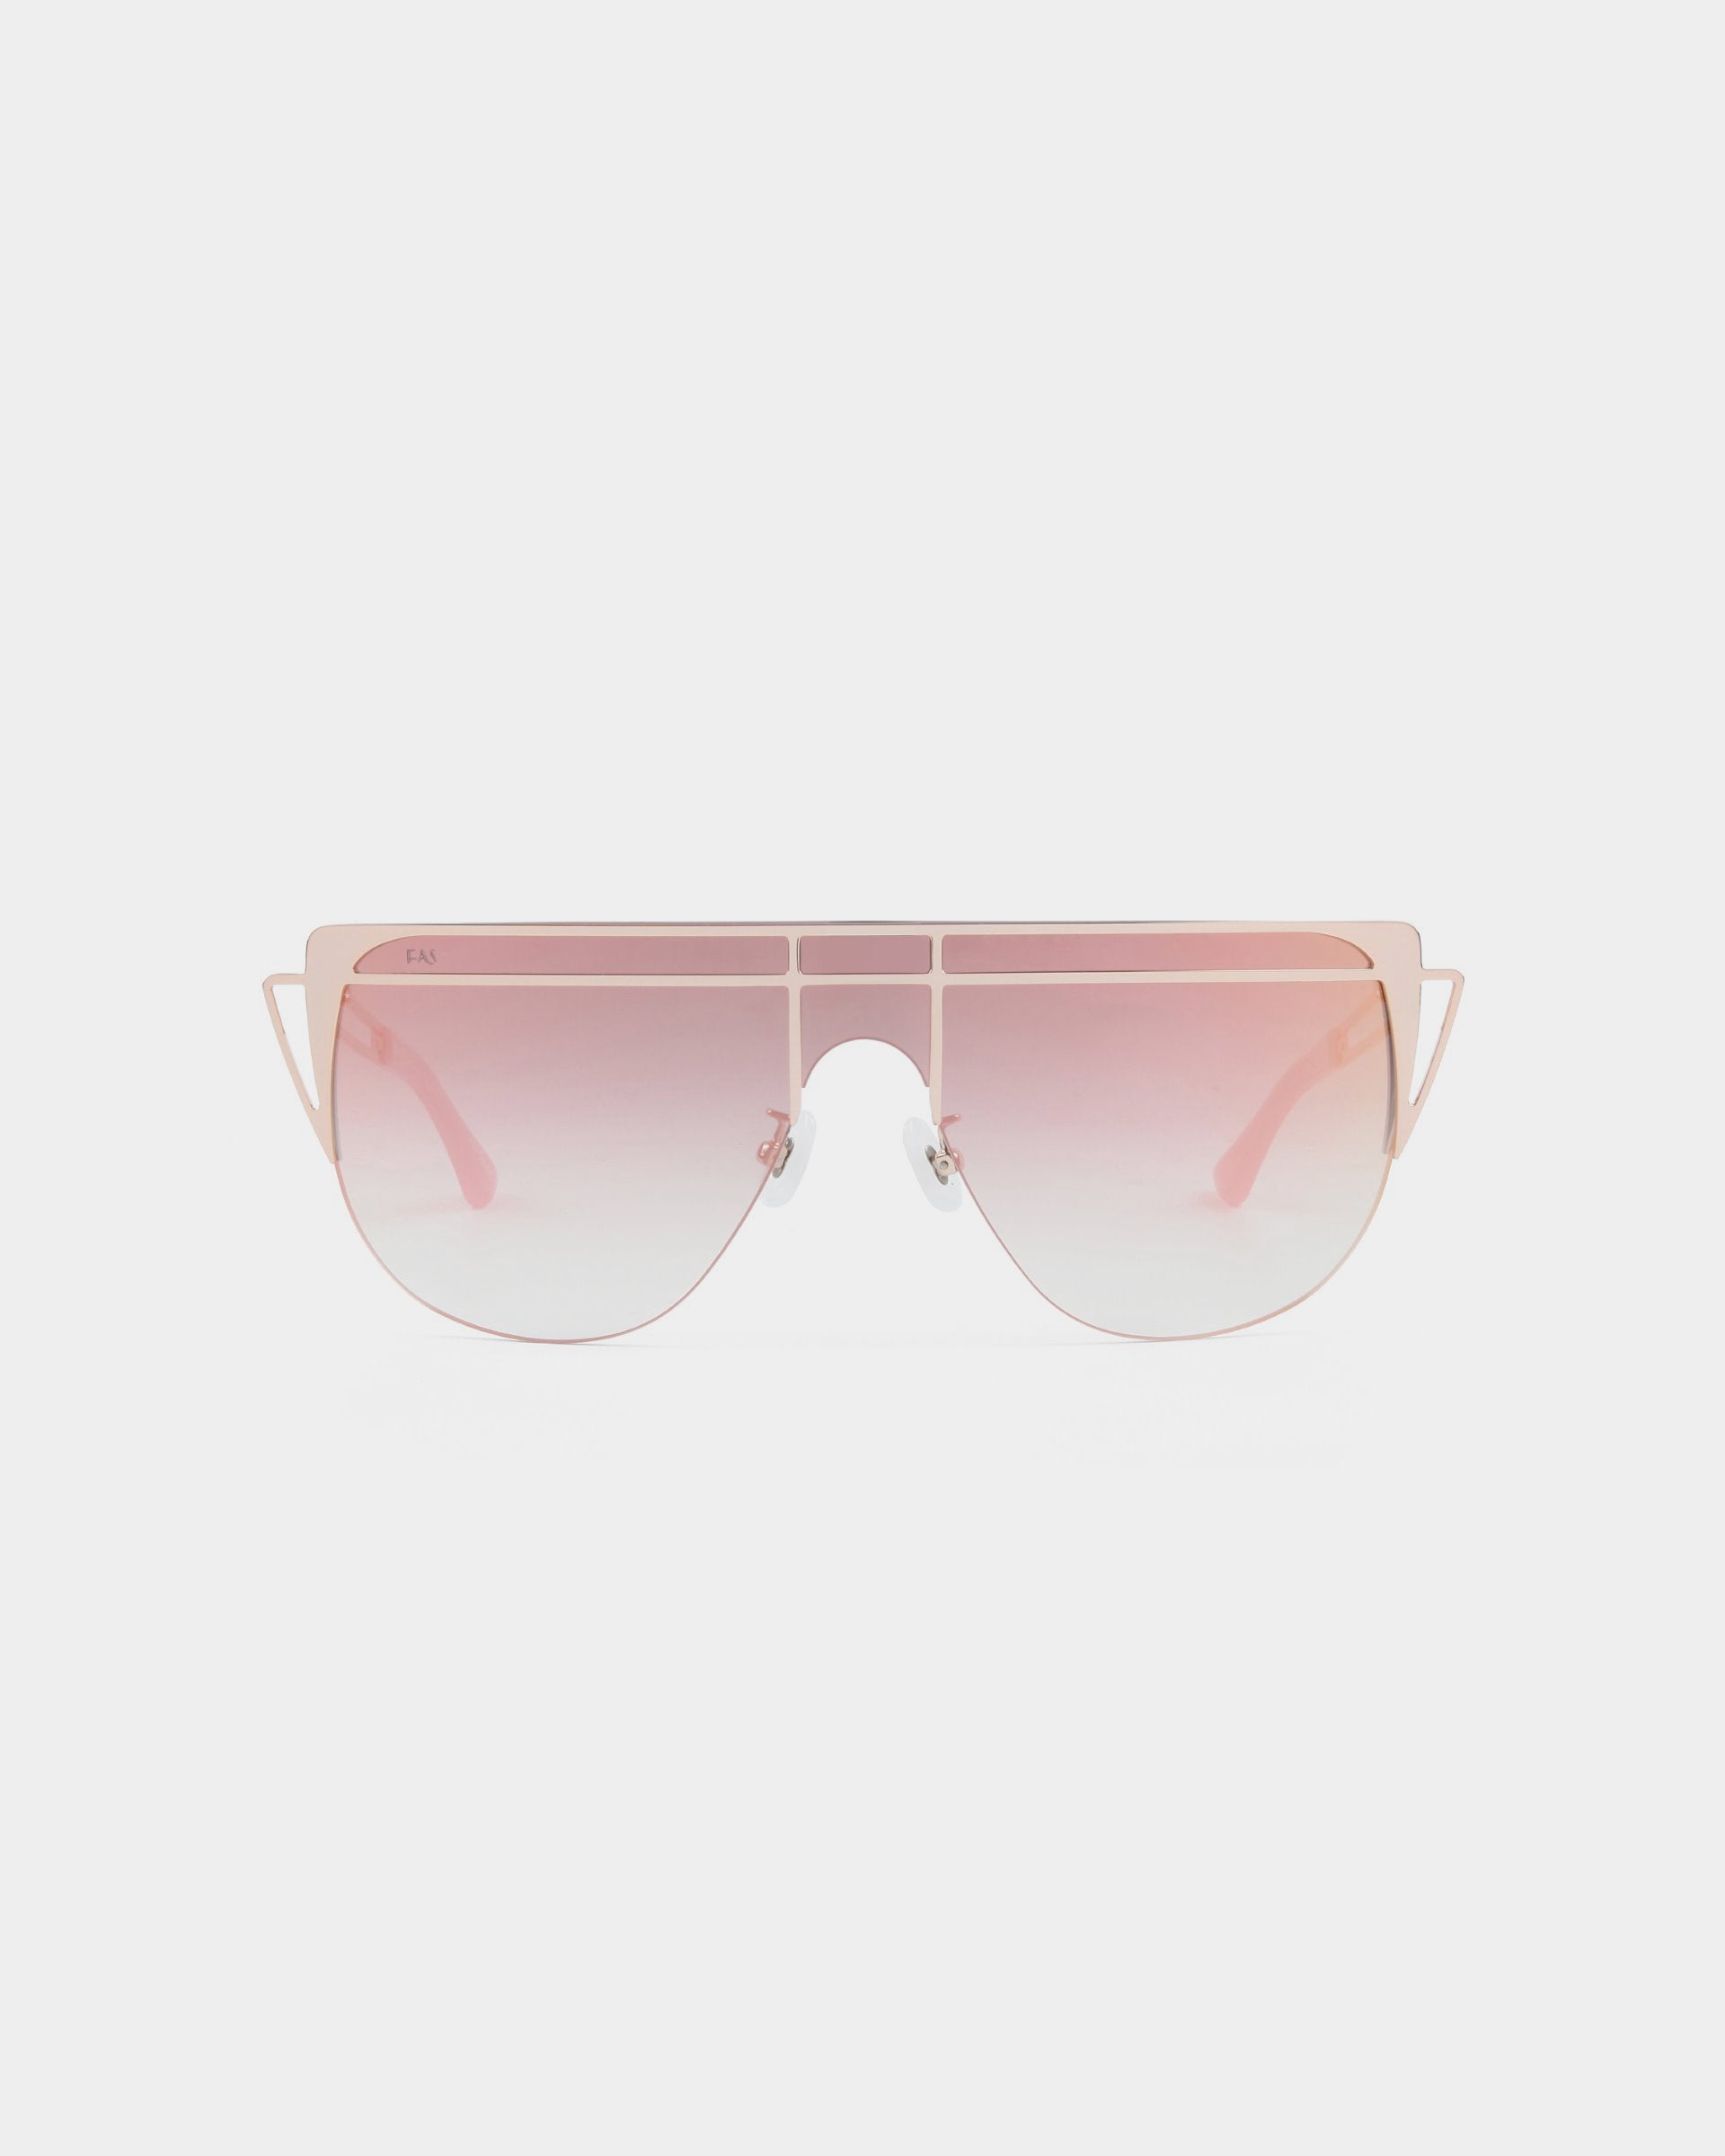 A pair of stylish, oversized avant-garde Alien sunglasses by For Art's Sake® with a thin handmade gold-plated stainless steel frame. The lenses are gradient pink, transitioning from light to dark. The frame features a double bridge and angular temple tips, adding a modern, geometric touch to the design. 100% UV protection is ensured.